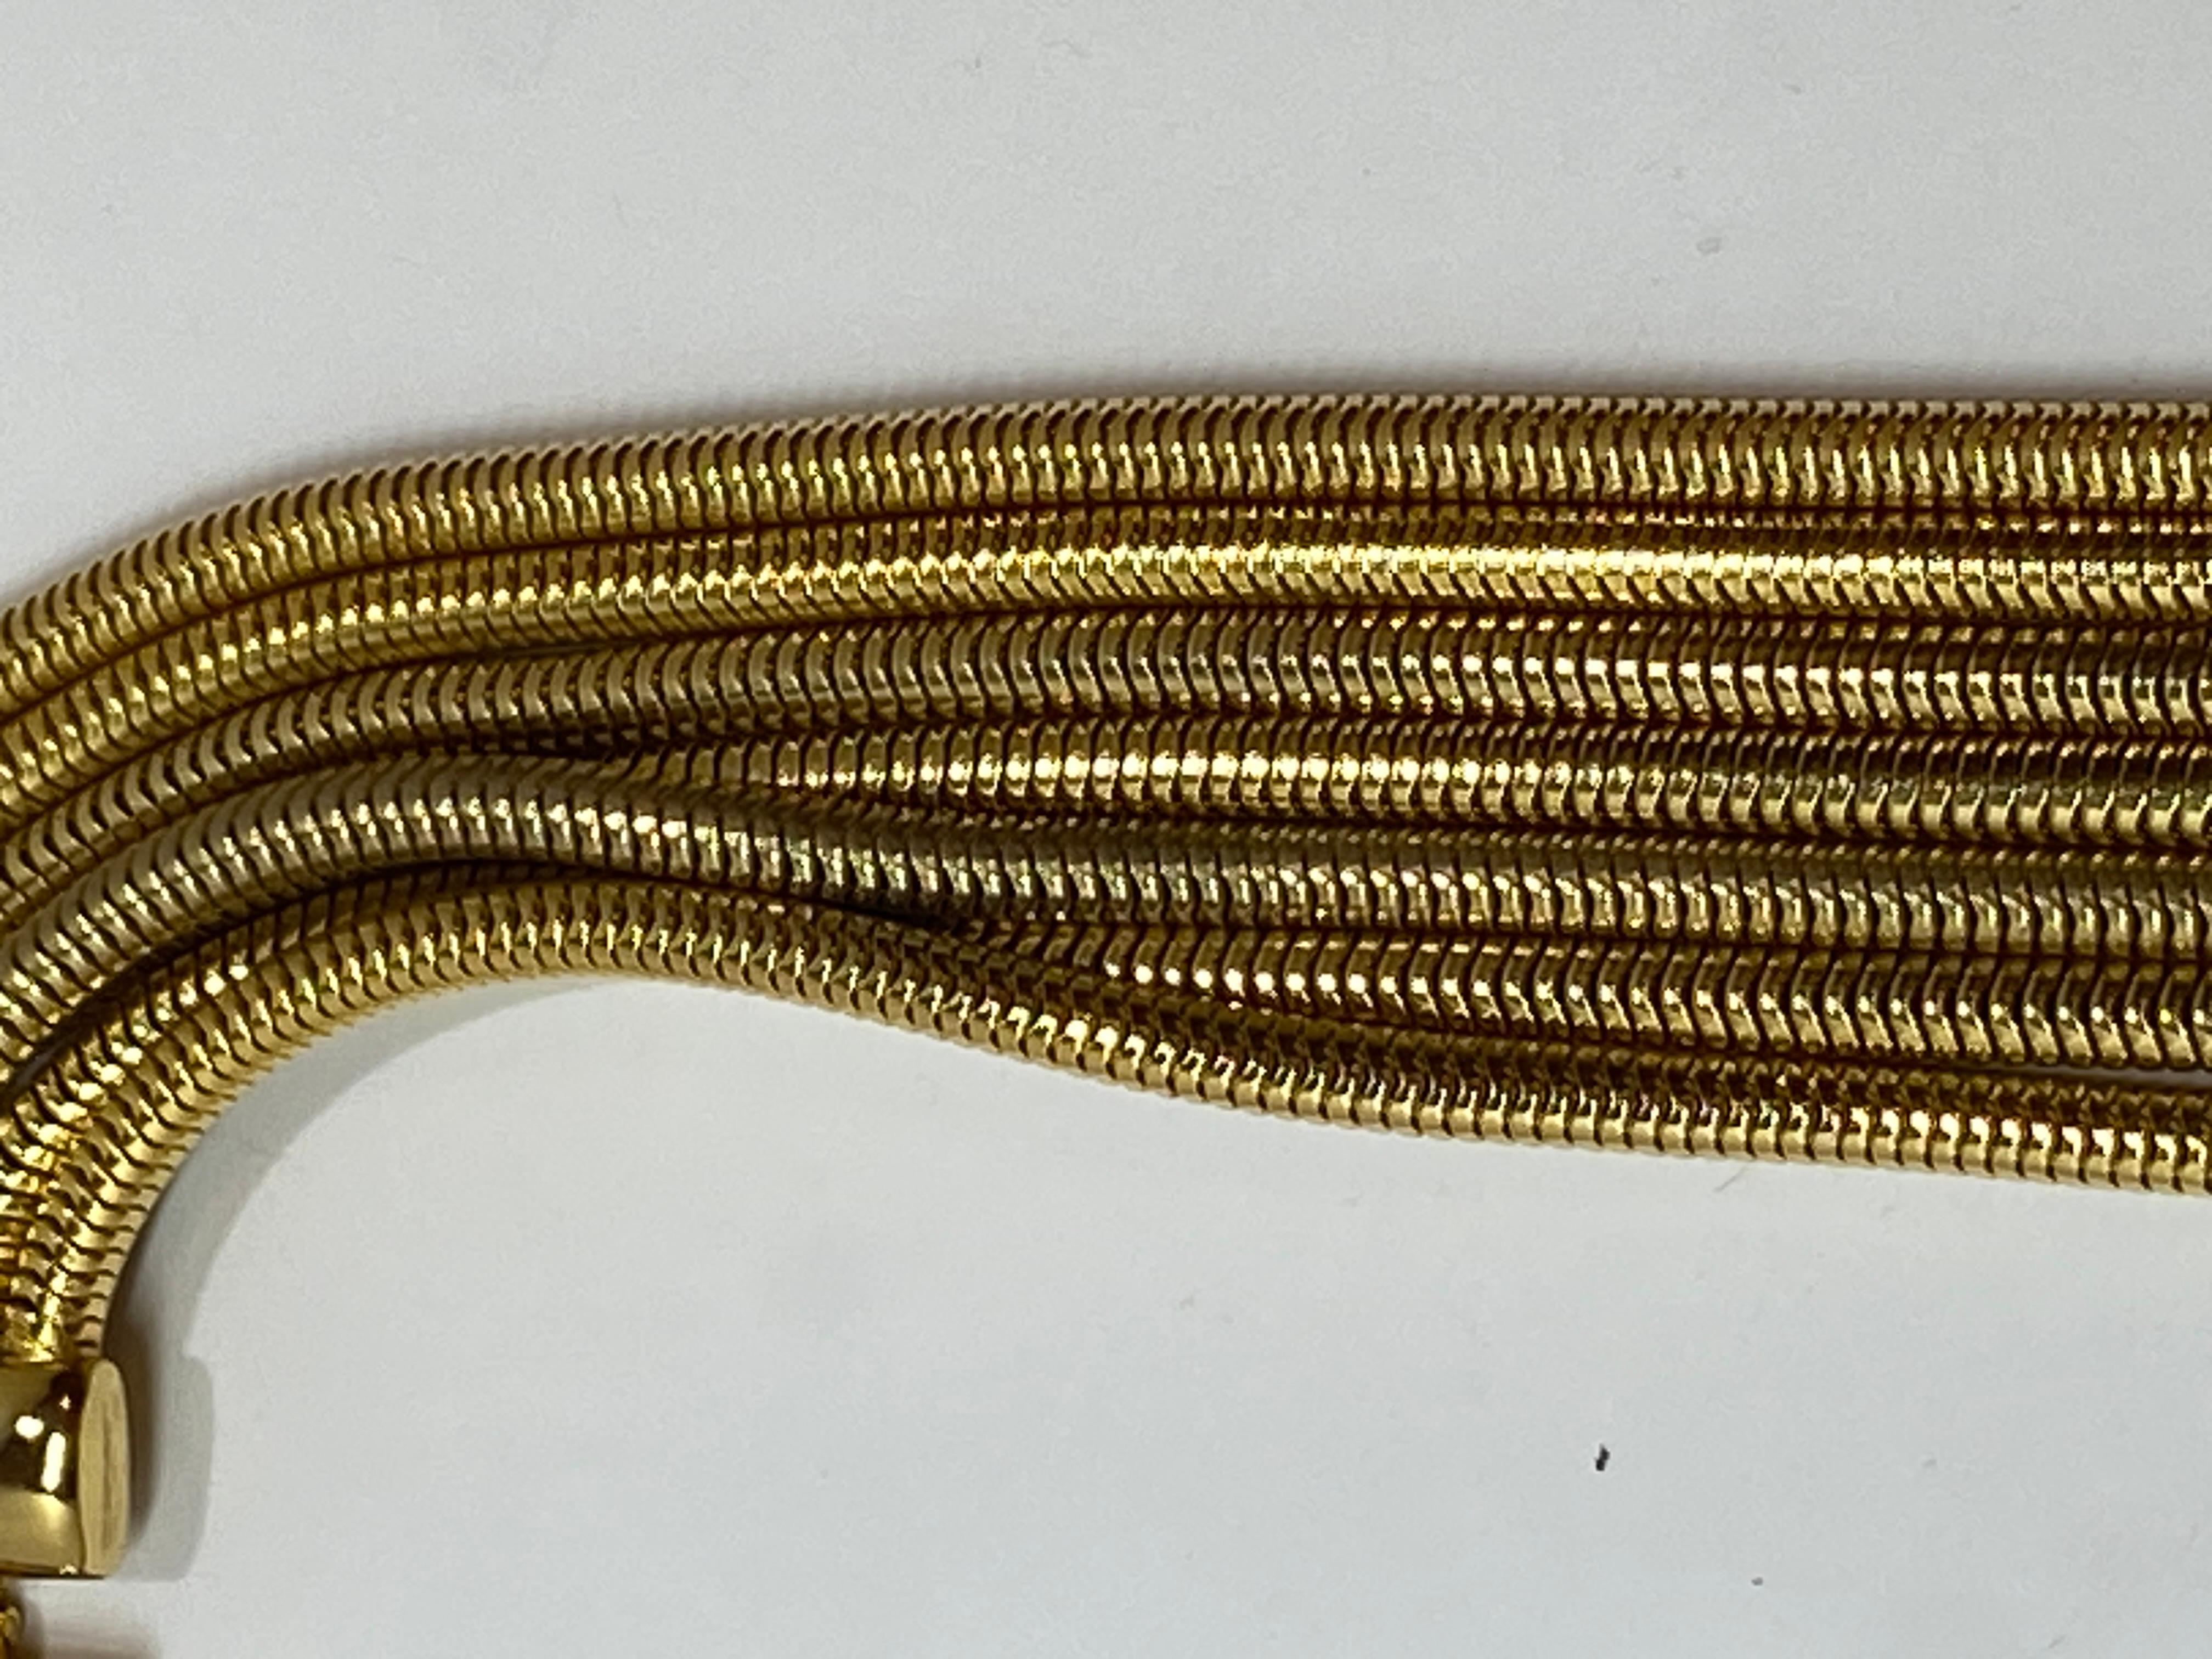 This wonderfully elegant smooth multi-linked snake-link polished gold hardware necklace measures 16 inches at the shortest to 21 inches. Necklace lays comfortably smooth along the neck. The width measures 1 1/4 inches. The closing is a 'snap'